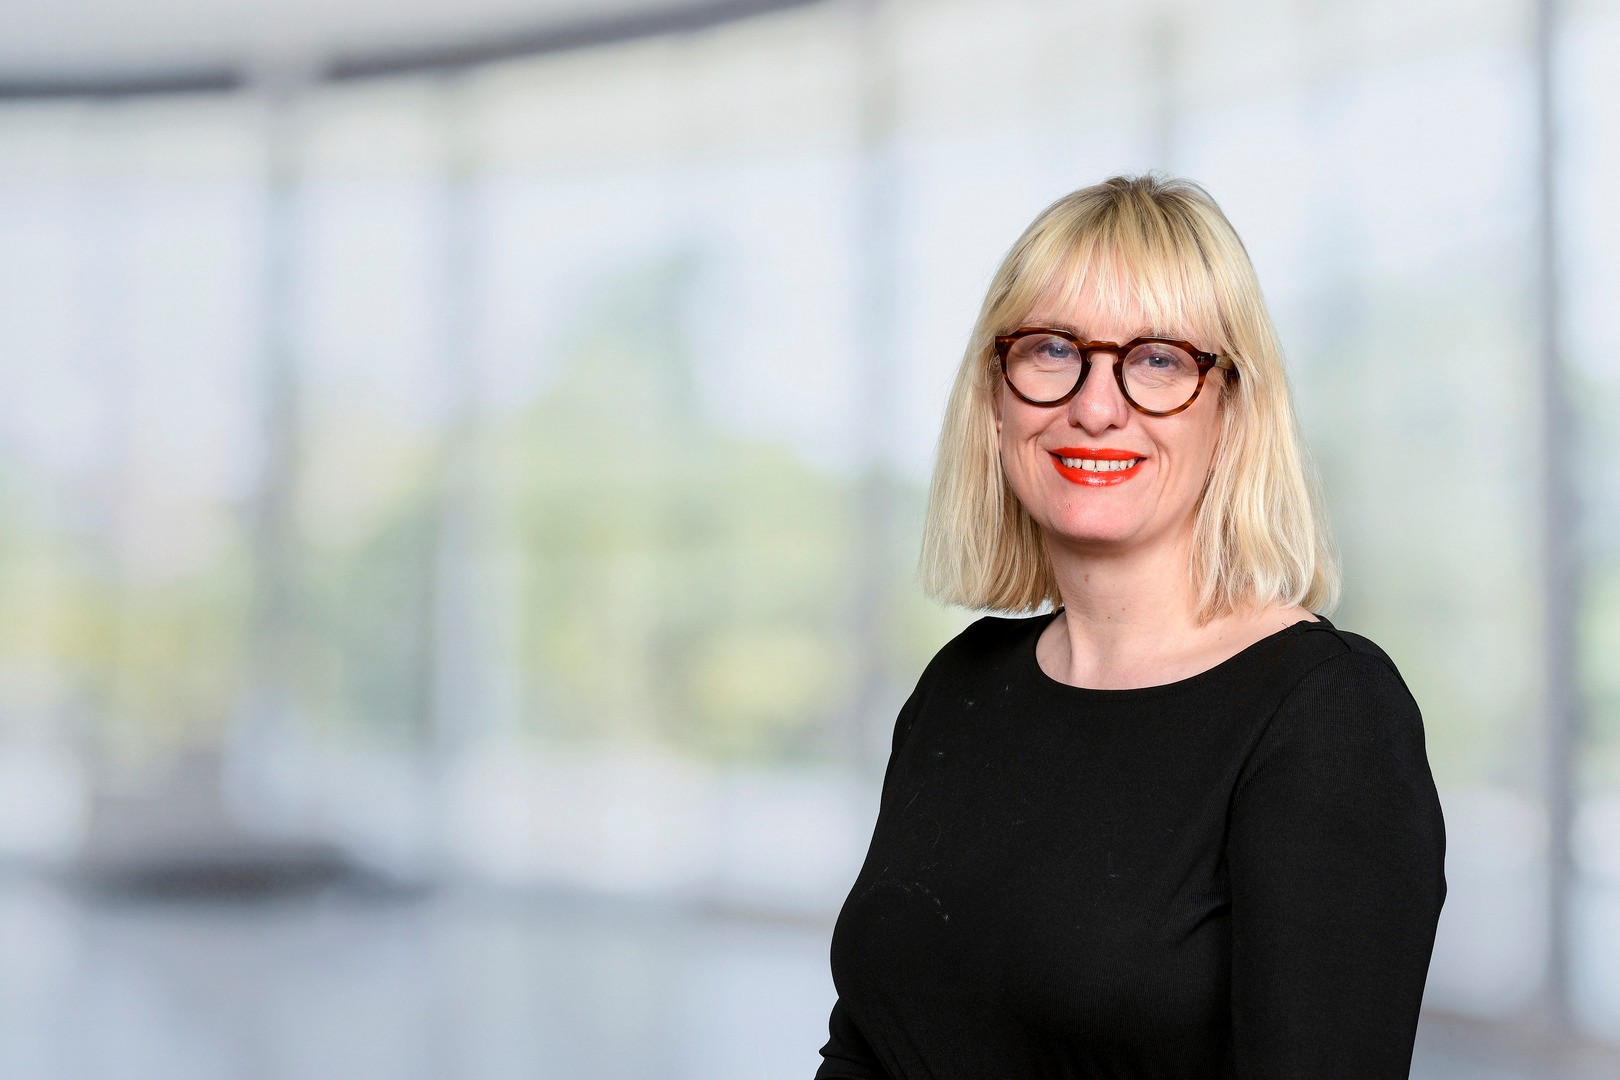 Clare Bailey is a Director in Savills Commercial Research team